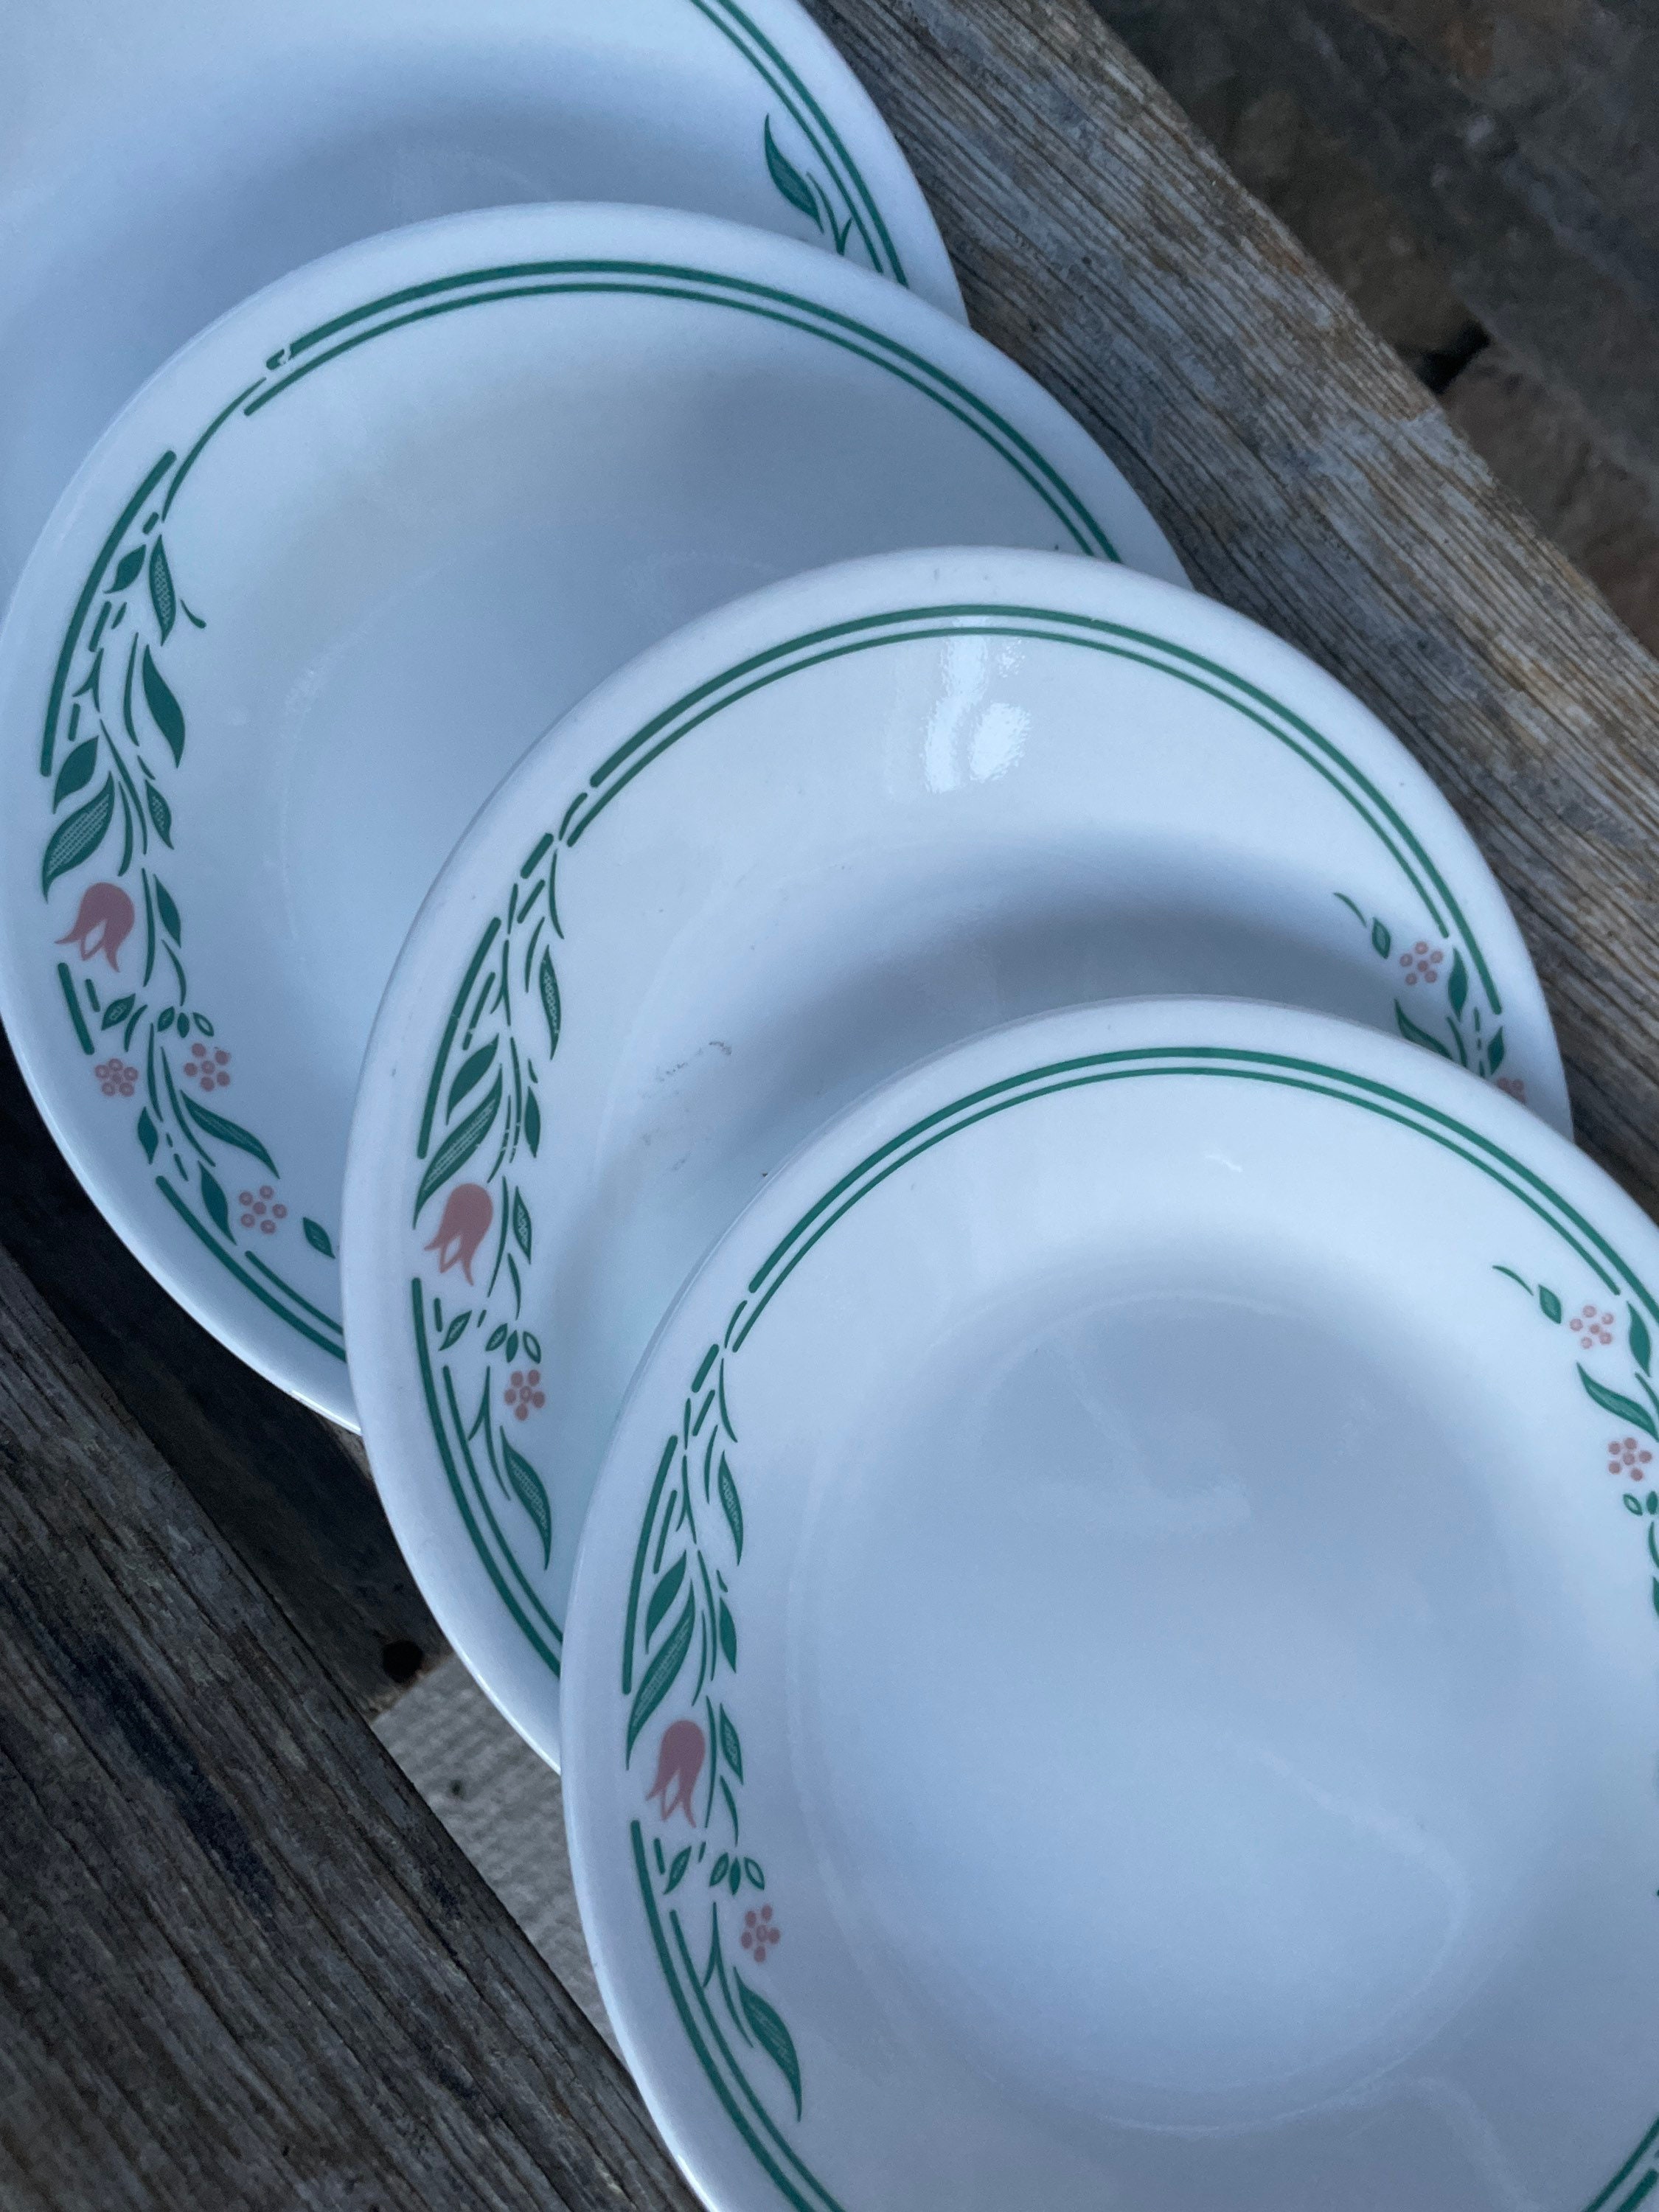 Affordable White Porcelain Dishes Farmhouse Style - Refresh Restyle